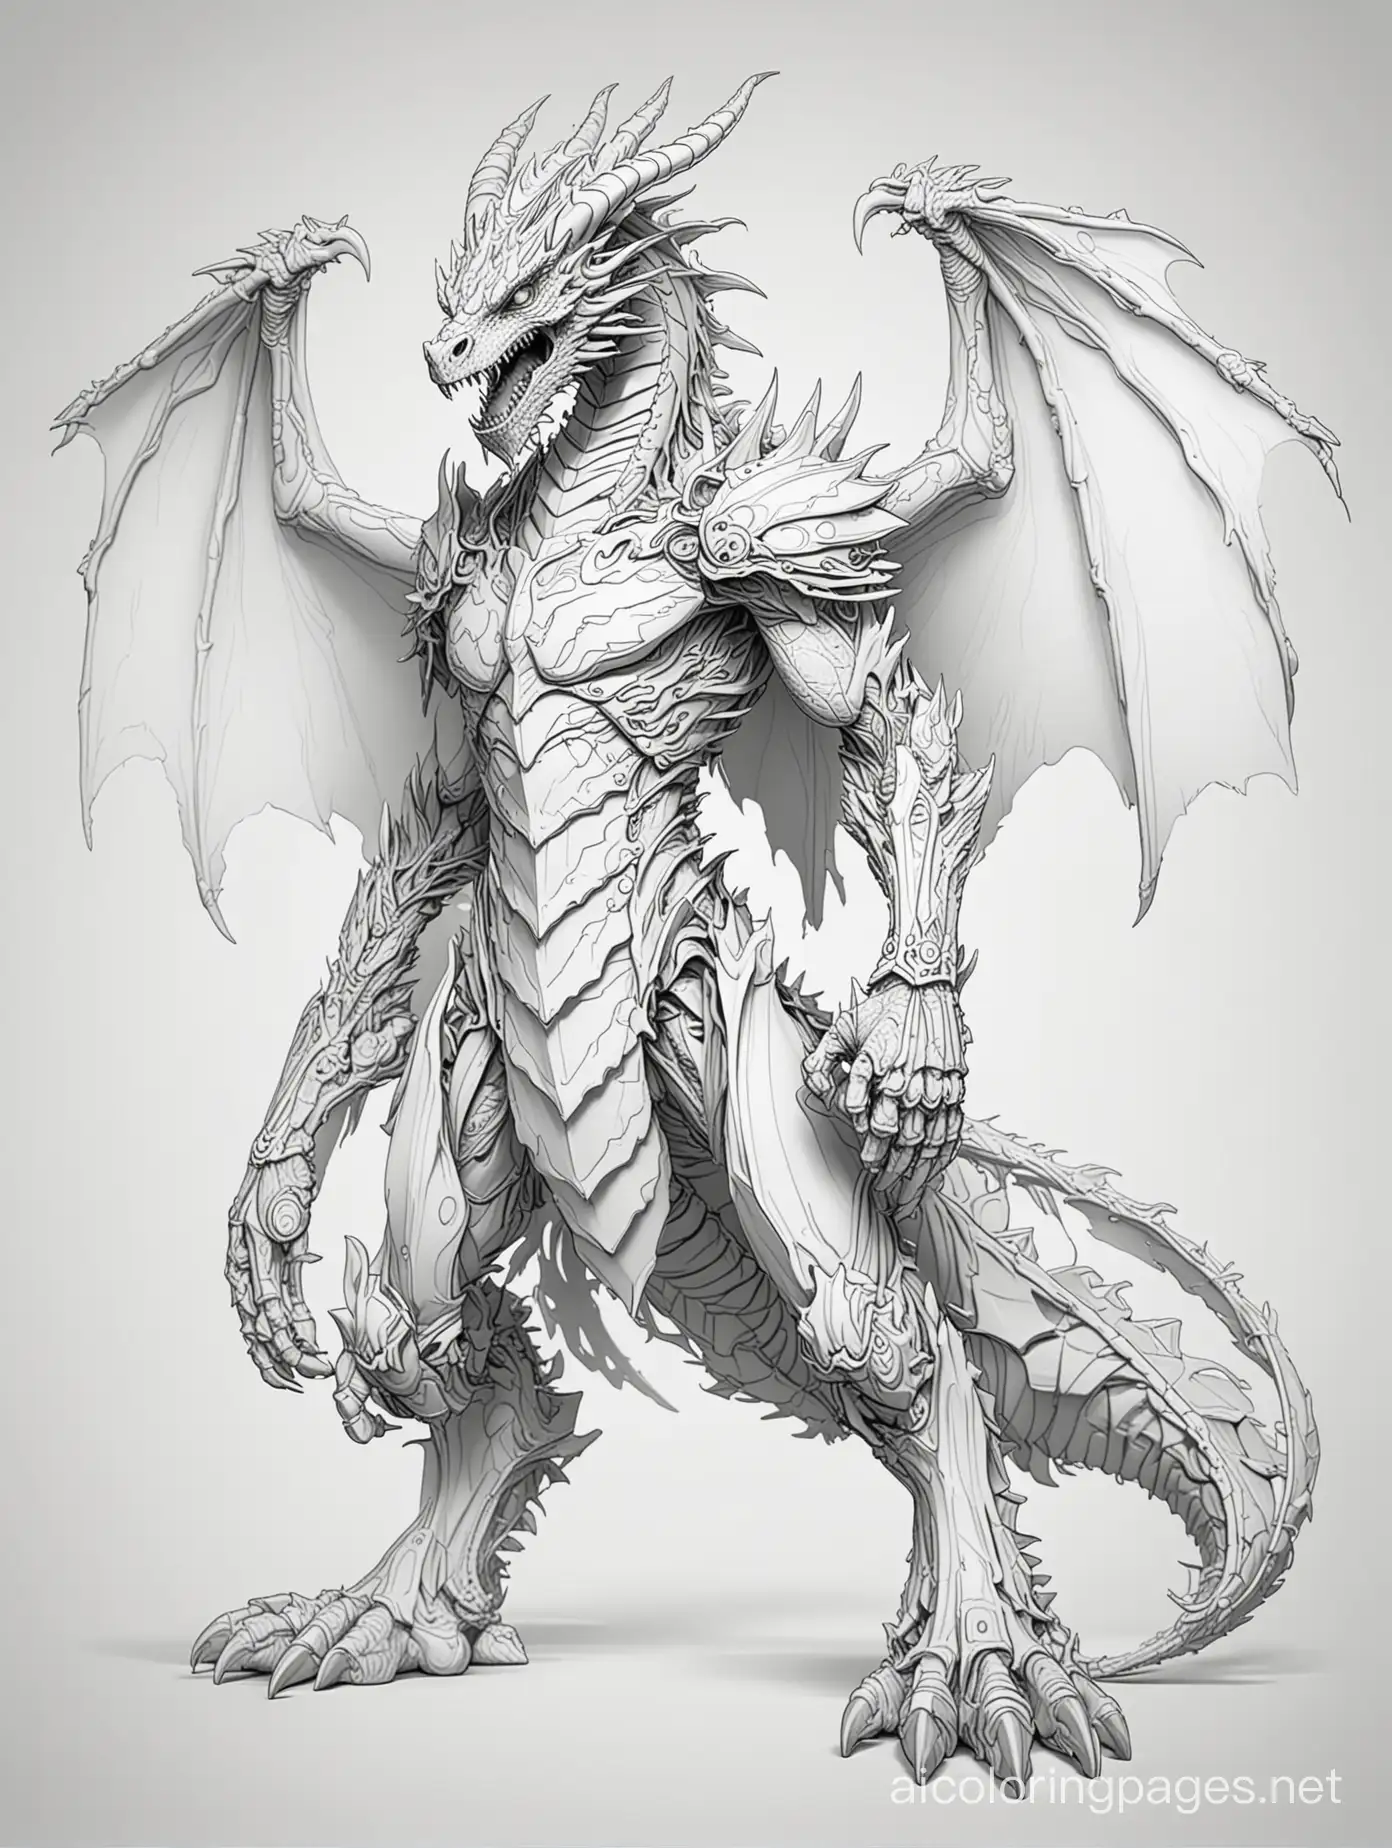 Bone titan dragon , Coloring Page, black and white, line art, white background, Simplicity, Ample White Space. The background of the coloring page is plain white to make it easy for young children to color within the lines. The outlines of all the subjects are easy to distinguish, making it simple for kids to color without too much difficulty